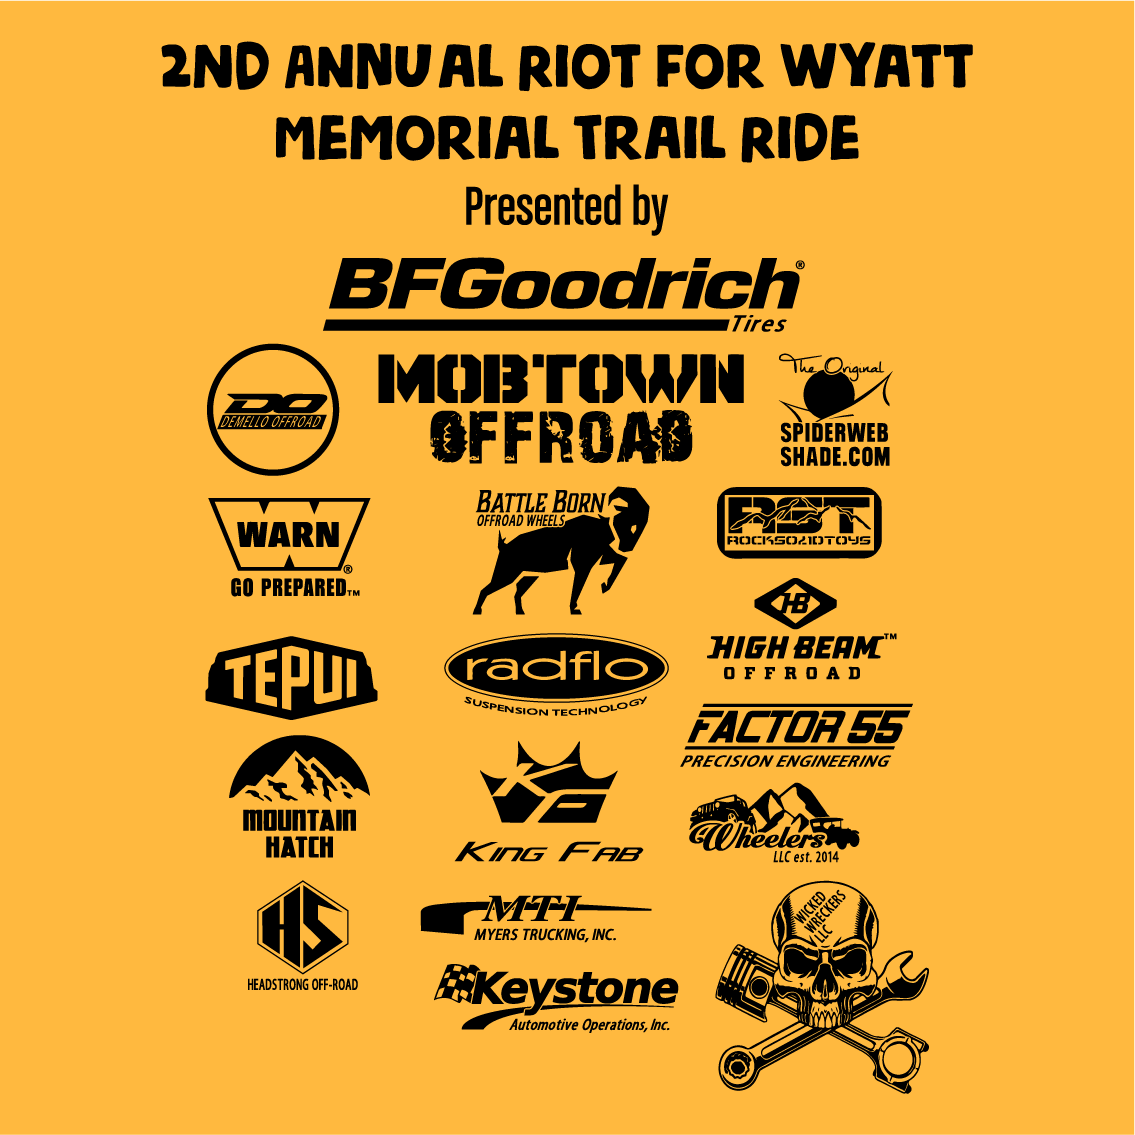 2nd Annual Riot for Wyatt shirts shirt design - zoomed